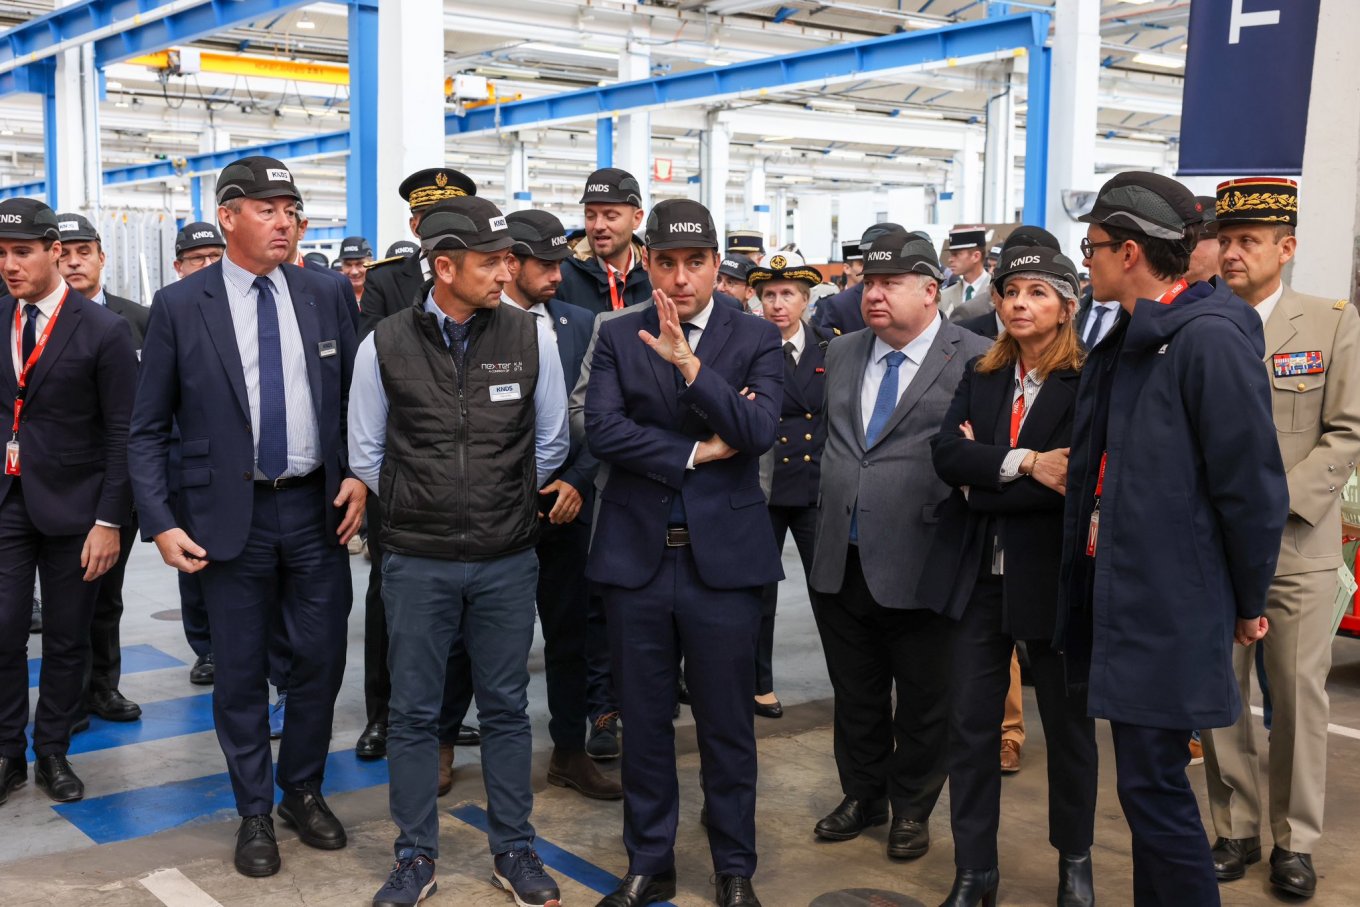 France Triples Production of Projectiles for Supply to Ukraine, The Minister of Defense of France Sebastien Lecornue during his visit on KNDS, Defense Express